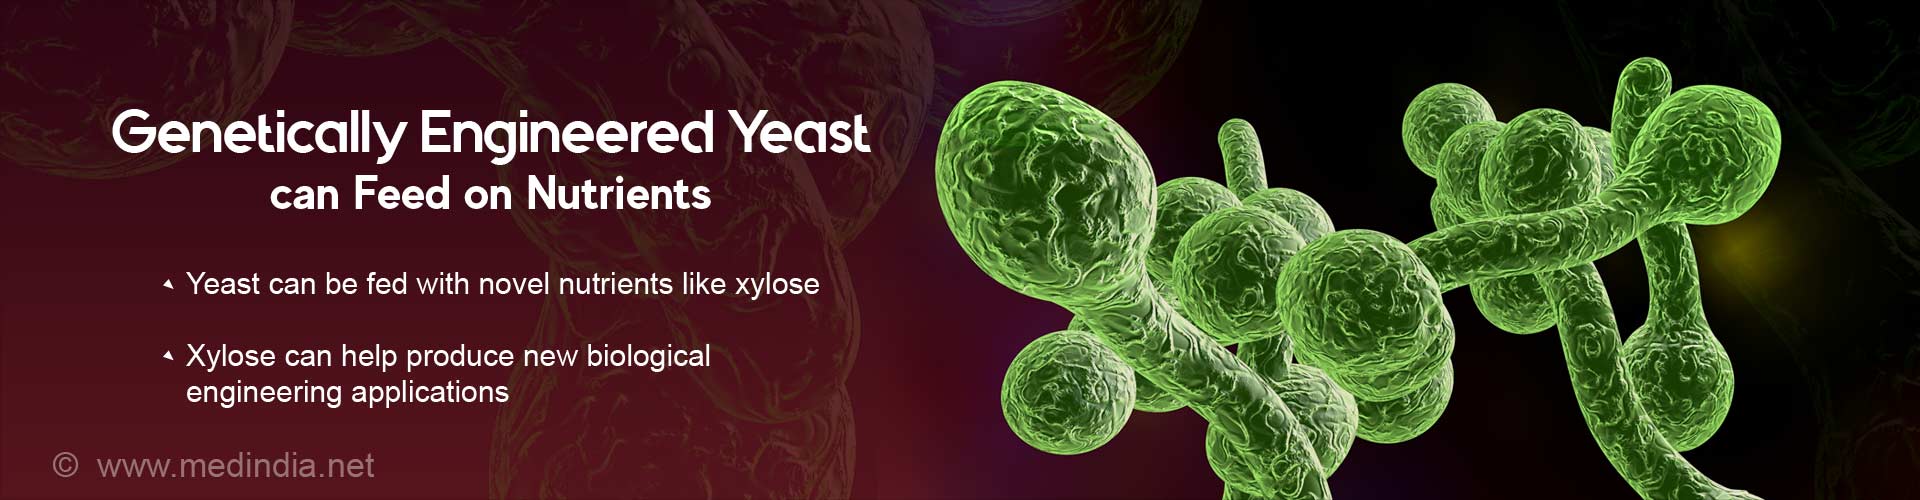 genetically engineered yeast can feed on nutrients
- yeast can be fed with novel nutrients like xylose
- xylose can help produce new biological engineering applications